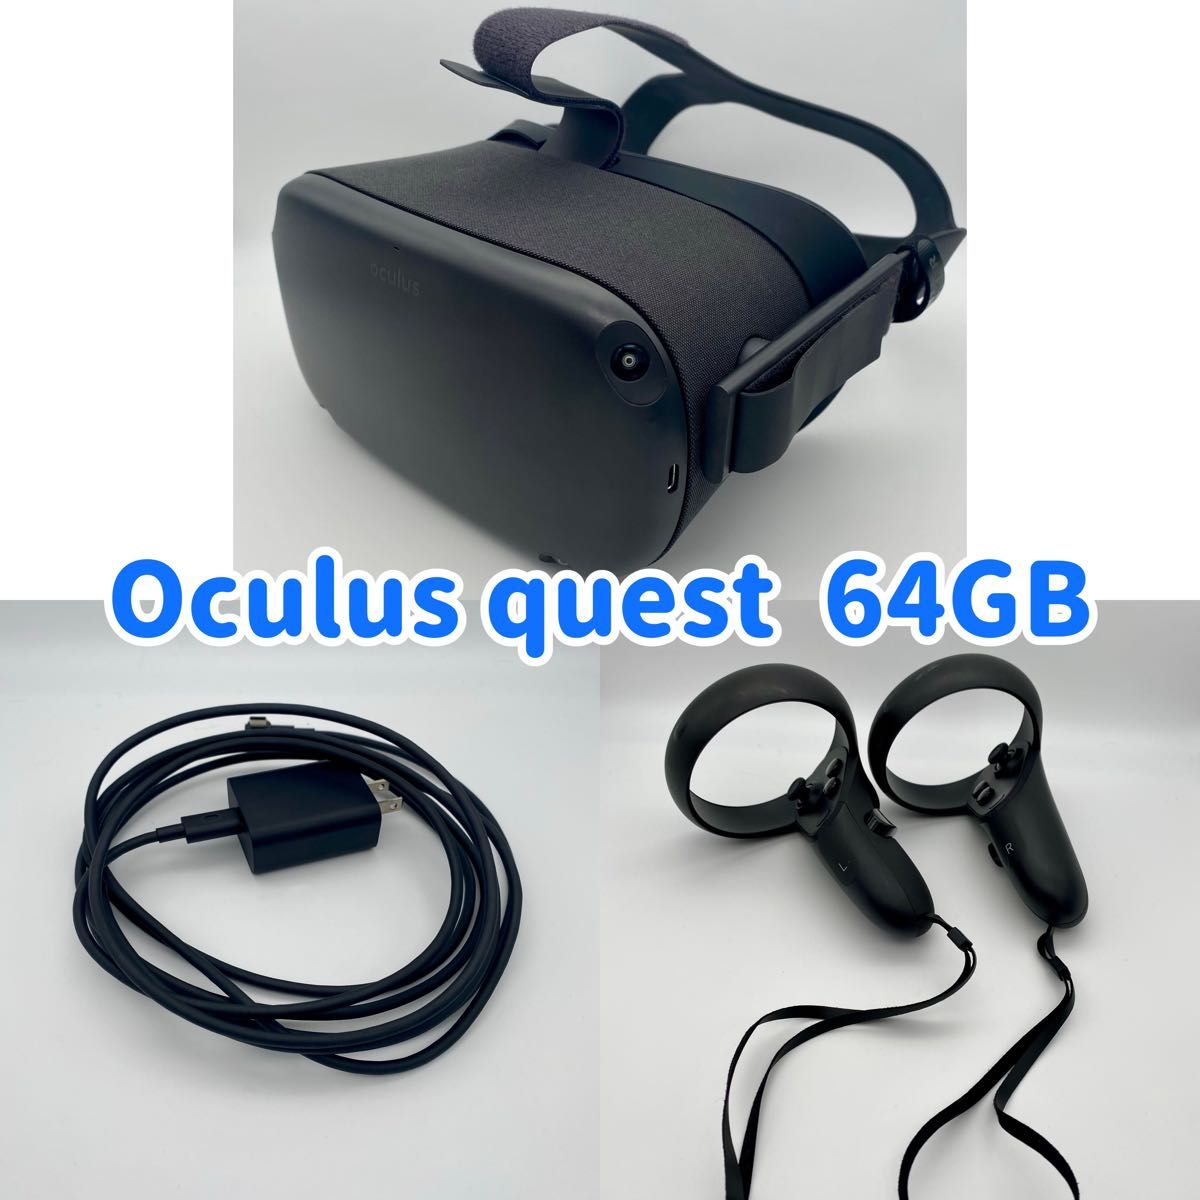 Oculus quest (meta quest) 64GB 一式セット｜PayPayフリマ